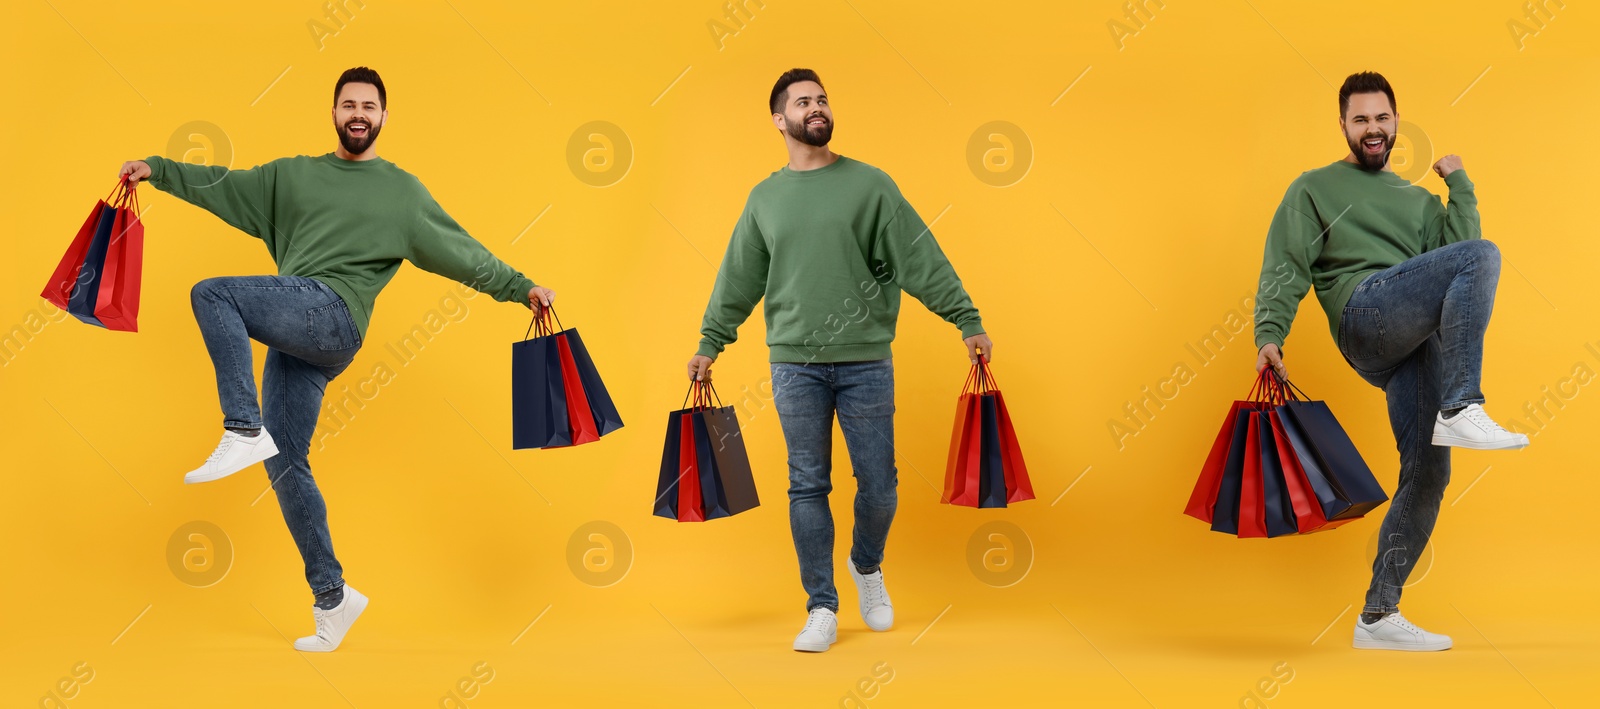 Image of Happy man with shopping bags on orange background, set with photos